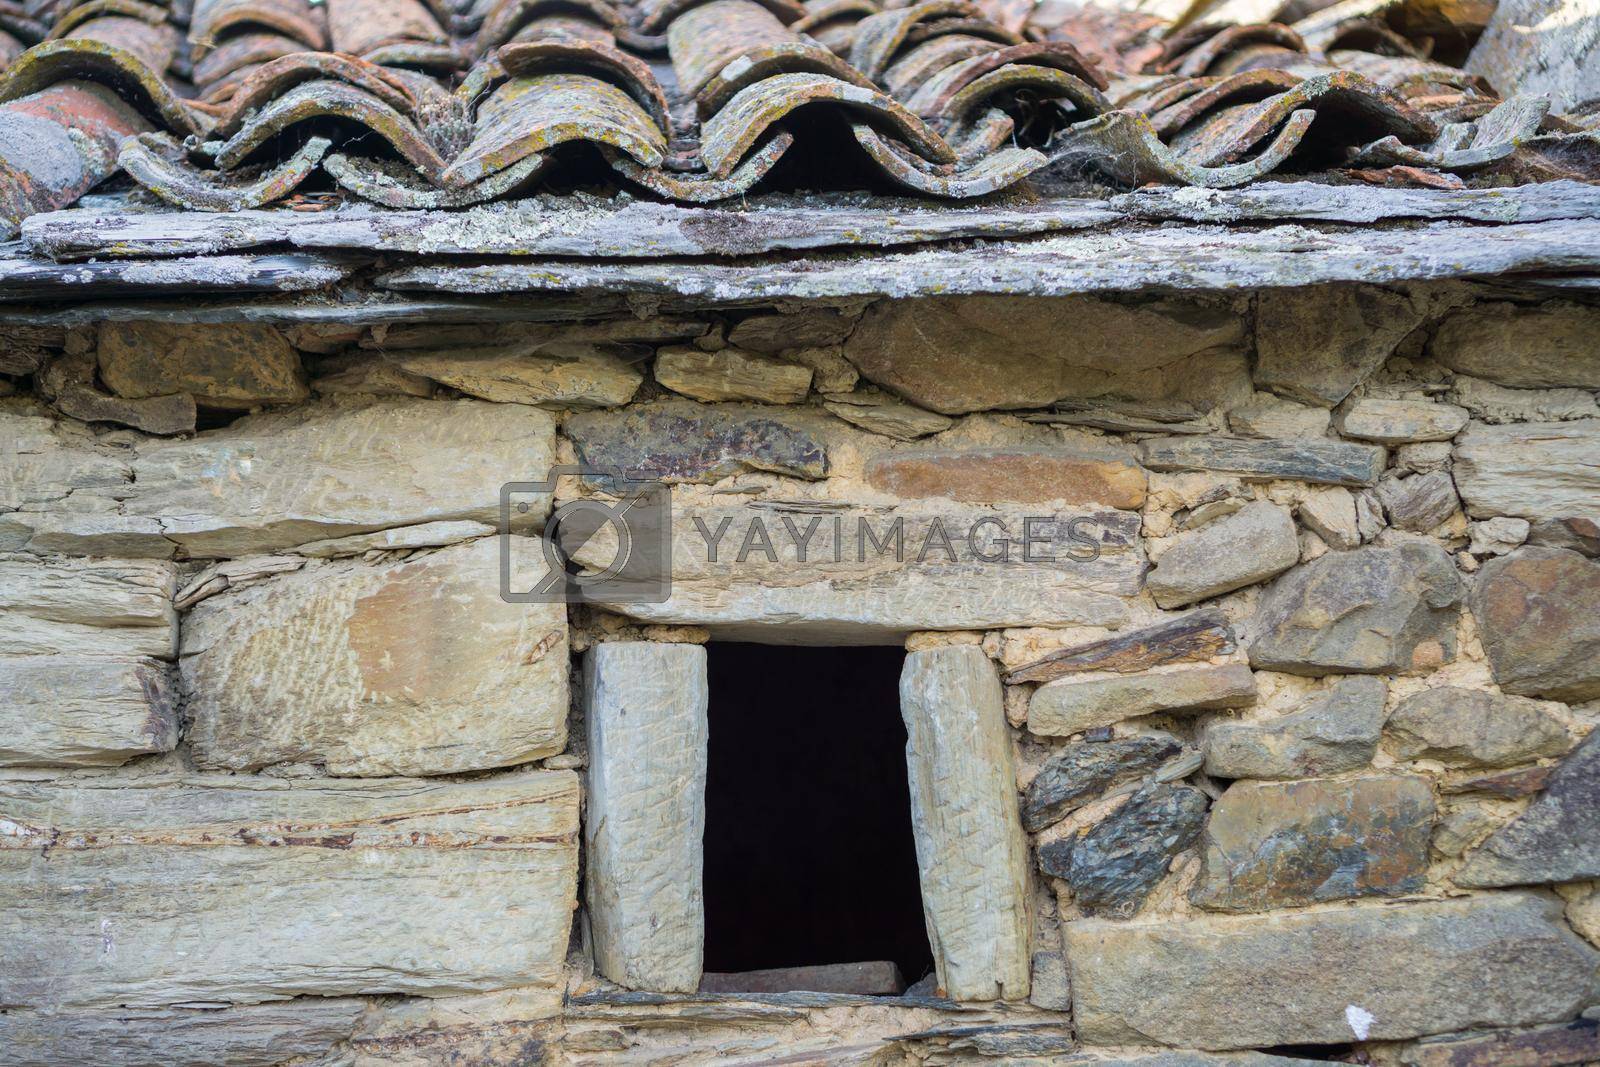 Royalty free image of Old stone window, slate roof and stone wall by FerradalFCG